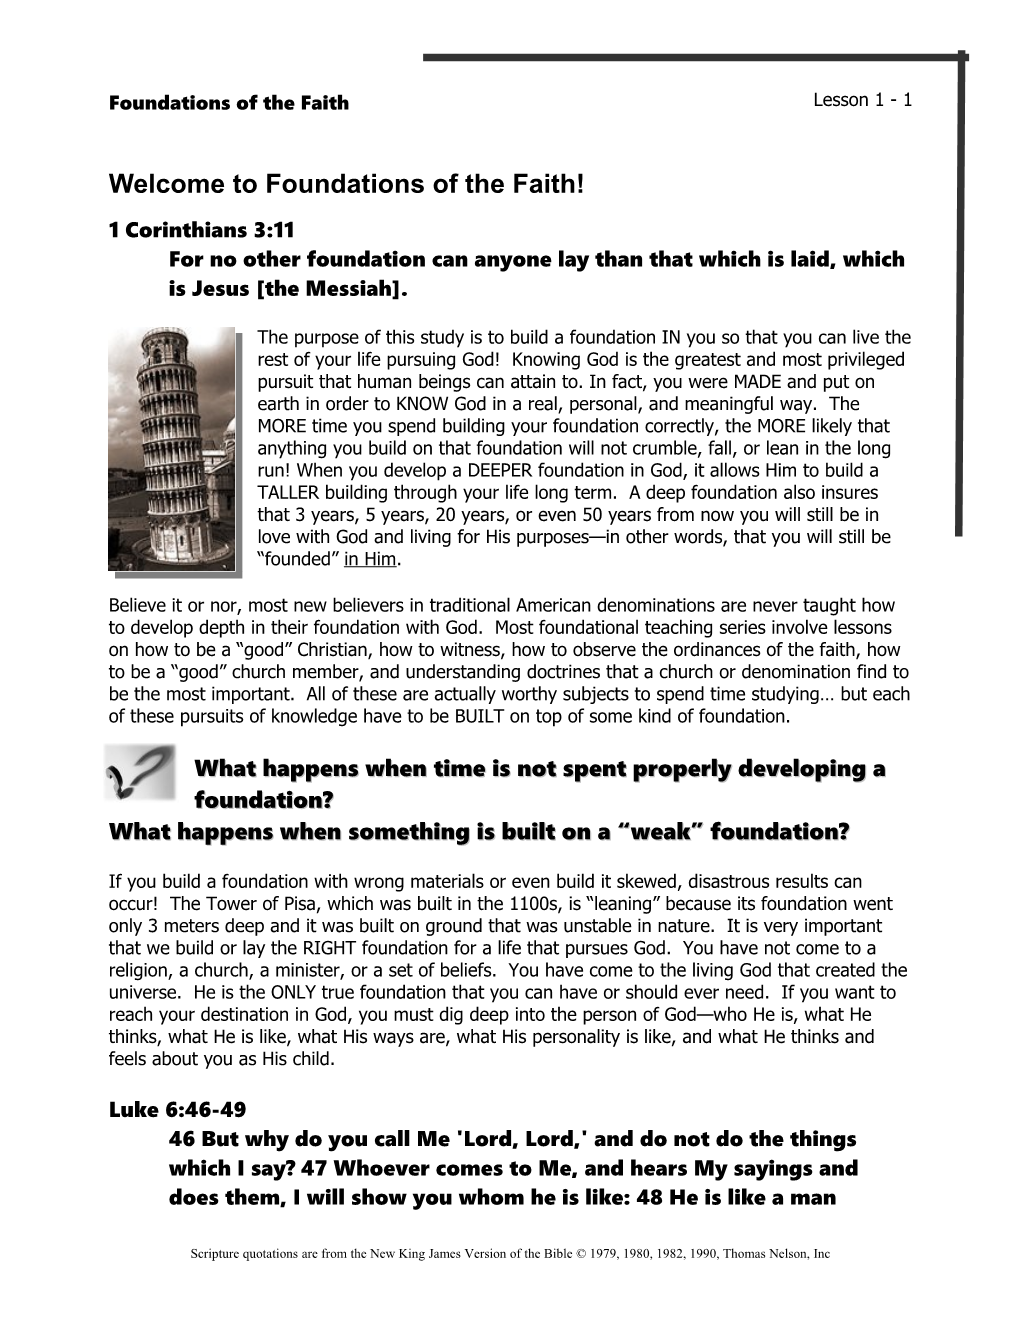 Welcome to Foundations of the Faith!